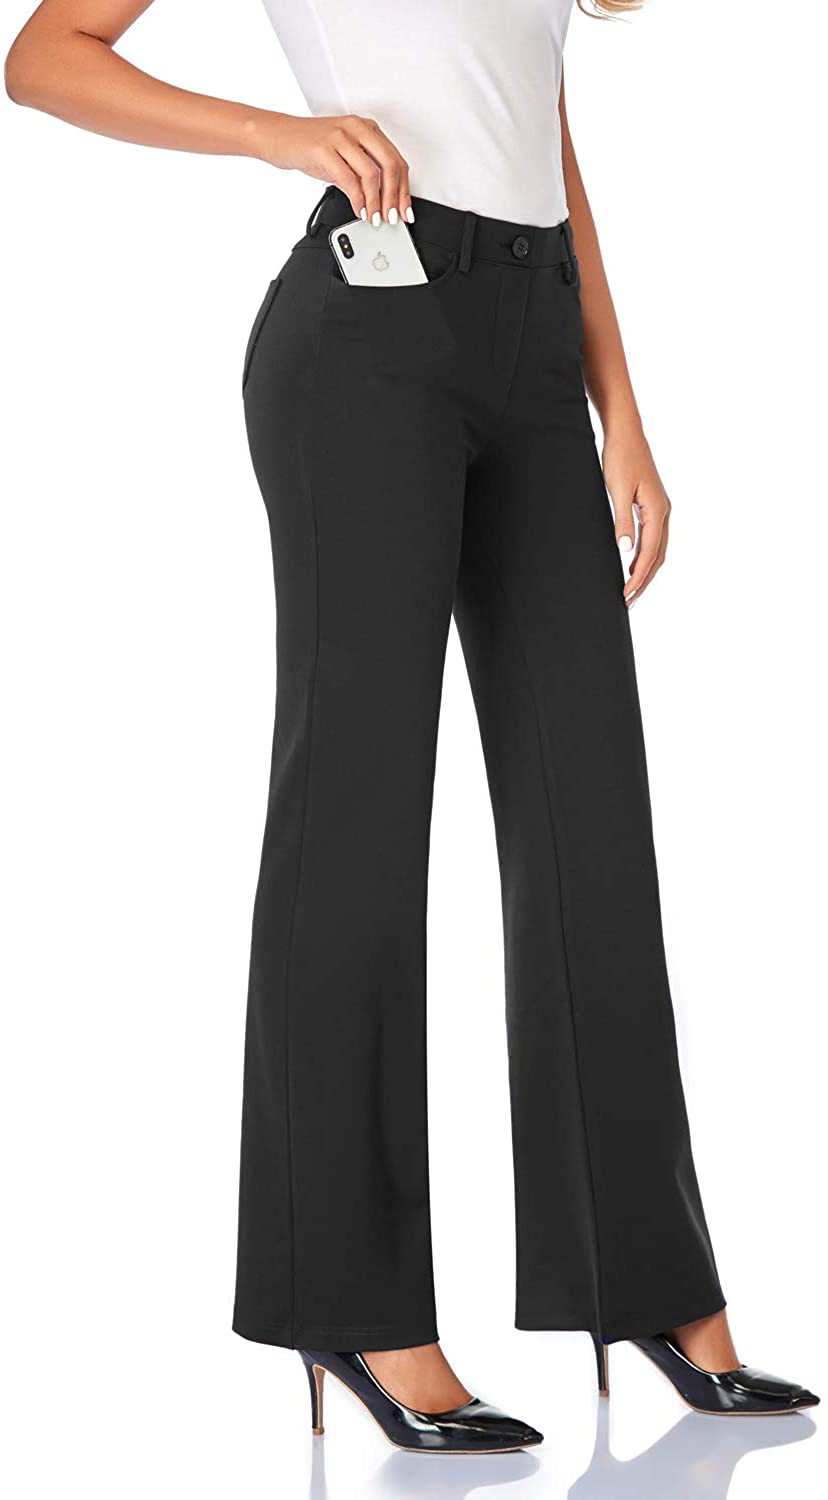 Petite Regular for Office Business Casual Tapata Women's 28''/30''/32''/34'' High Waist Stretchy Bootcut Dress Pants Tall 